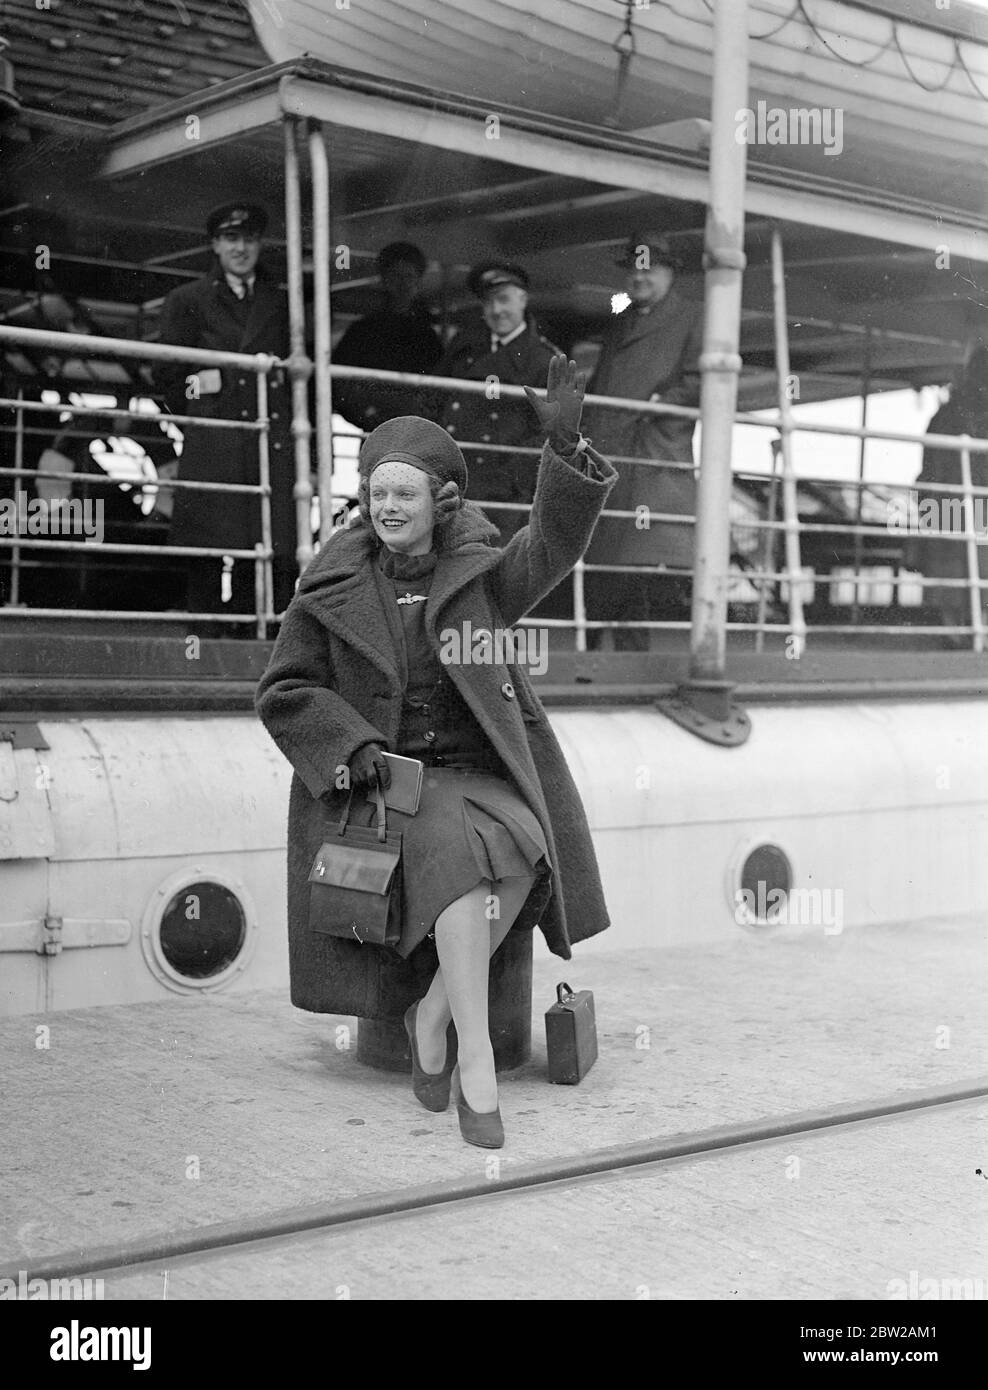 Anna Neagle back in England to play 'Peter Pan' in London. Anna Neagle, the British actress, arrived at Southampton on the liner 'Normandie' on her return from America. She is to play the main part in 'Peter Pan', the Christmas play, to be staged at the London Palladium for matinees only. 29 November 1937 Stock Photo